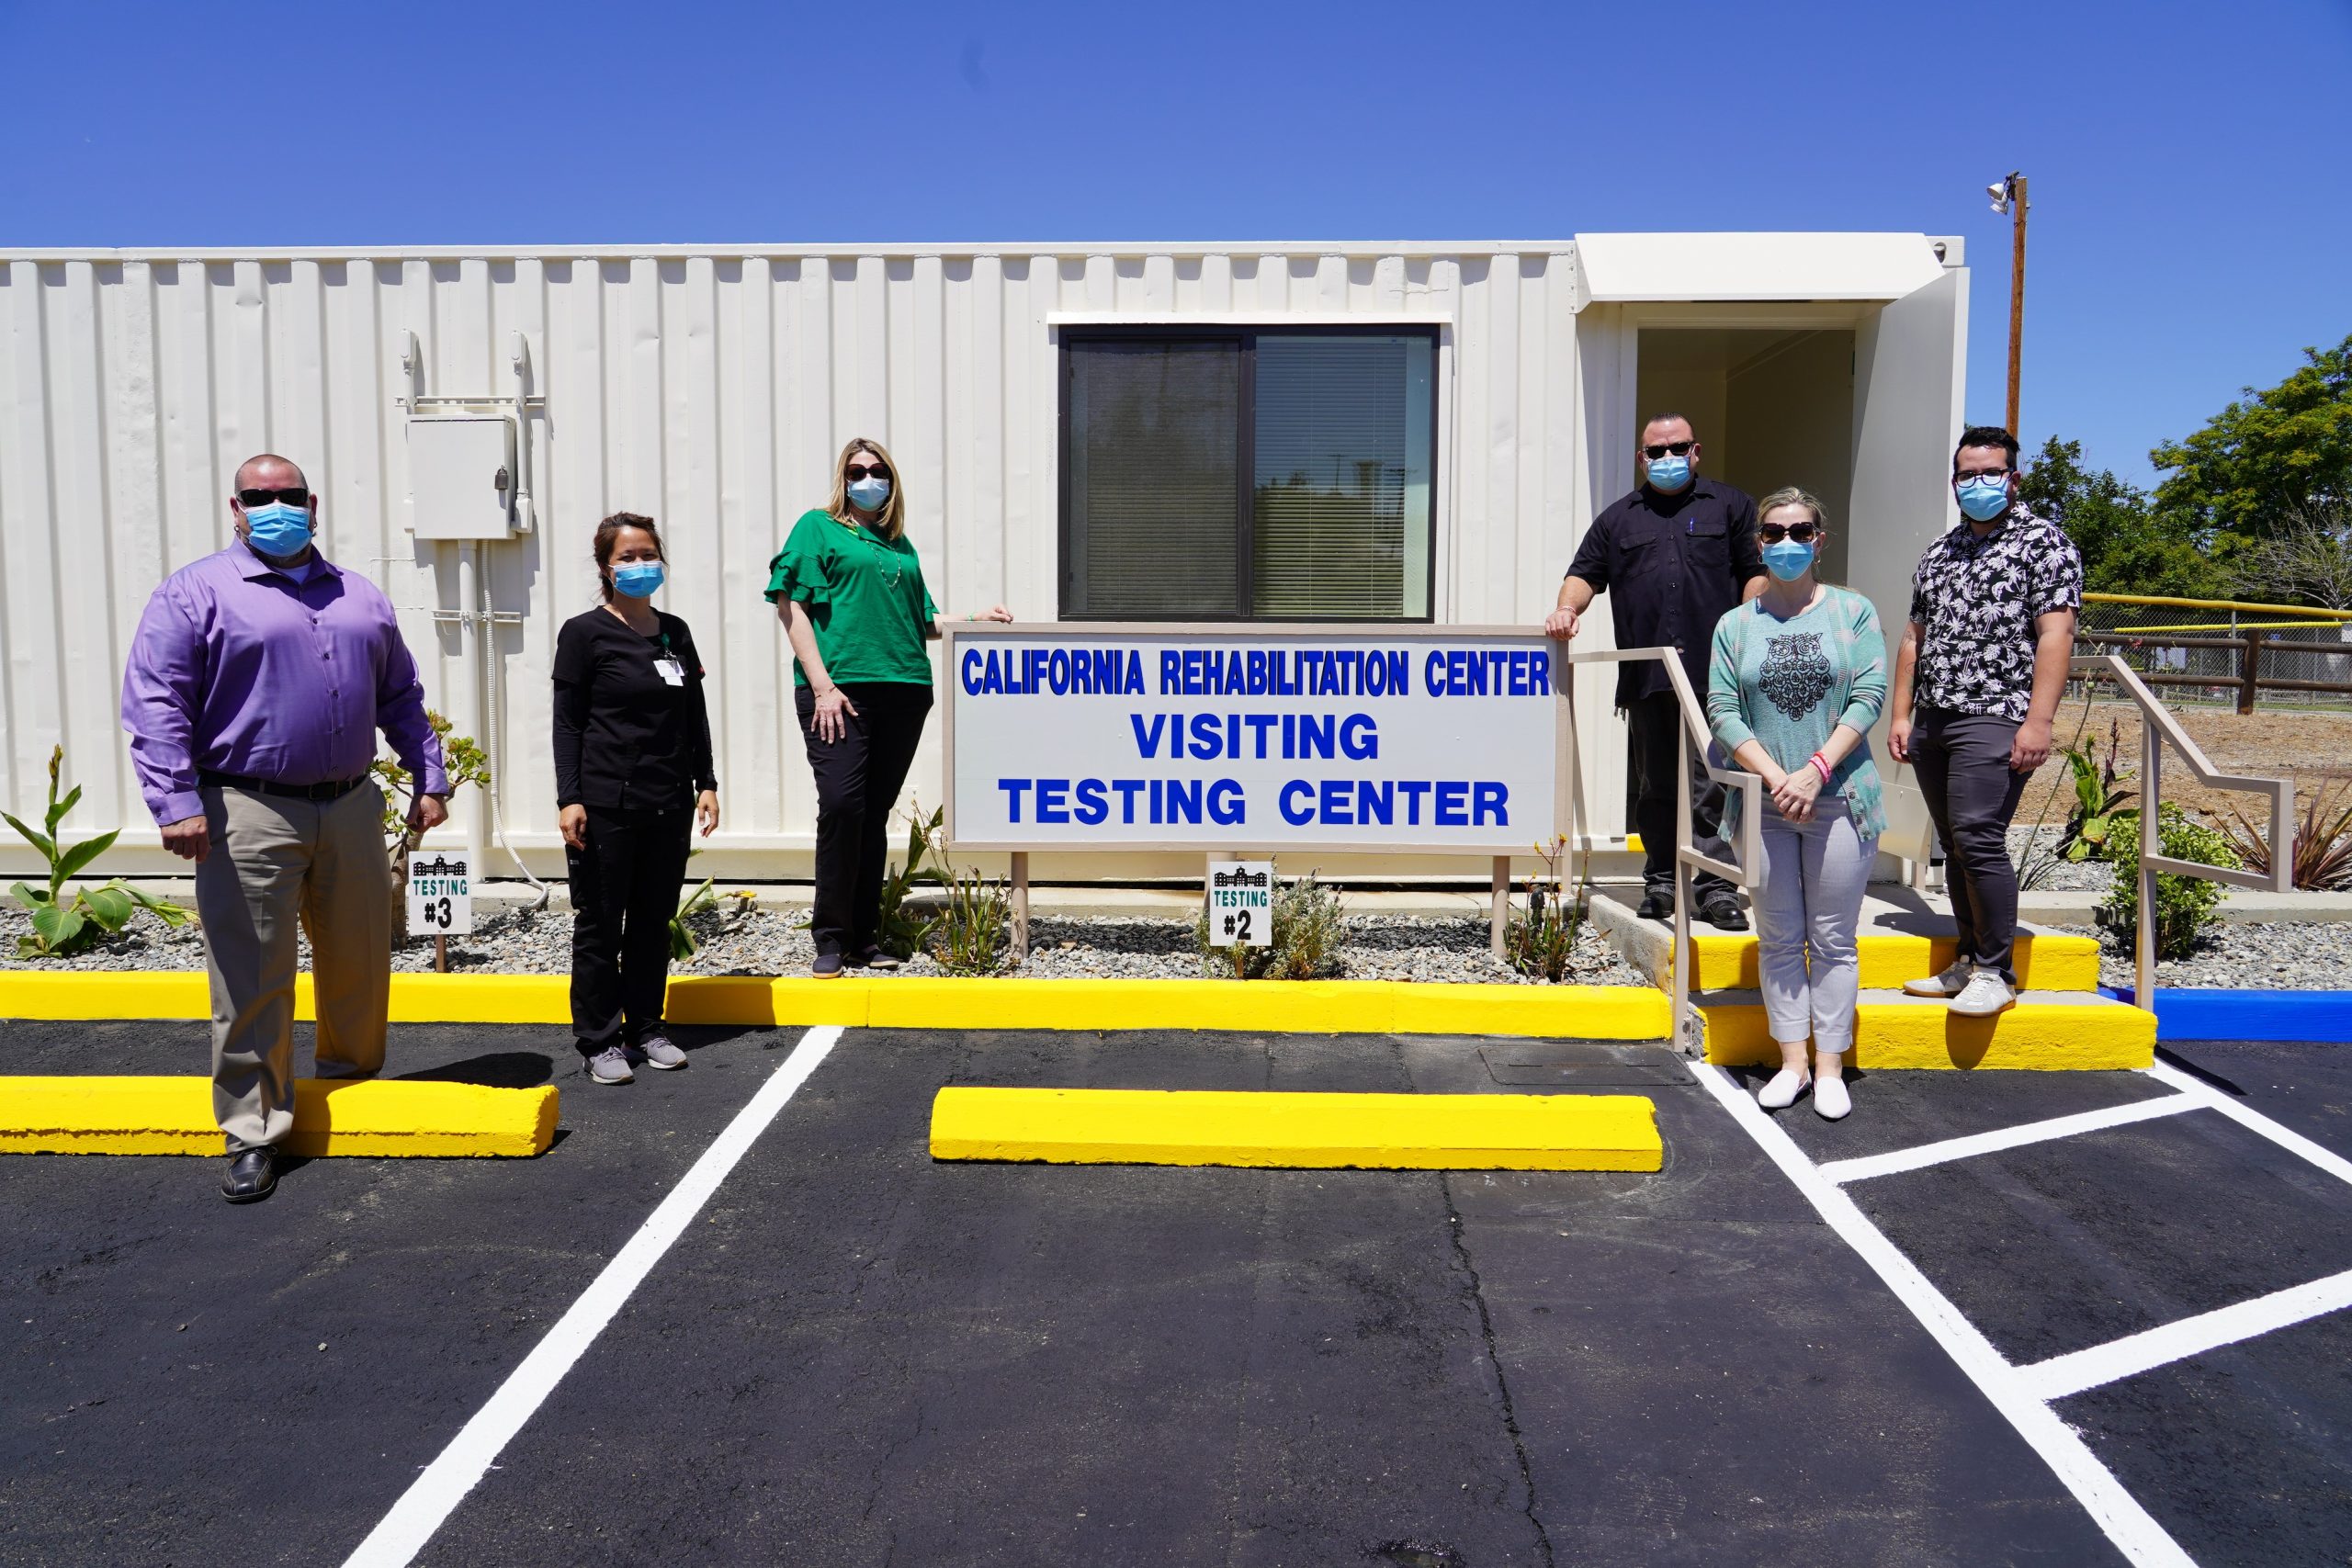 Staff stand at a sign that says California Rehabilitation Center Visitor Testing Center.